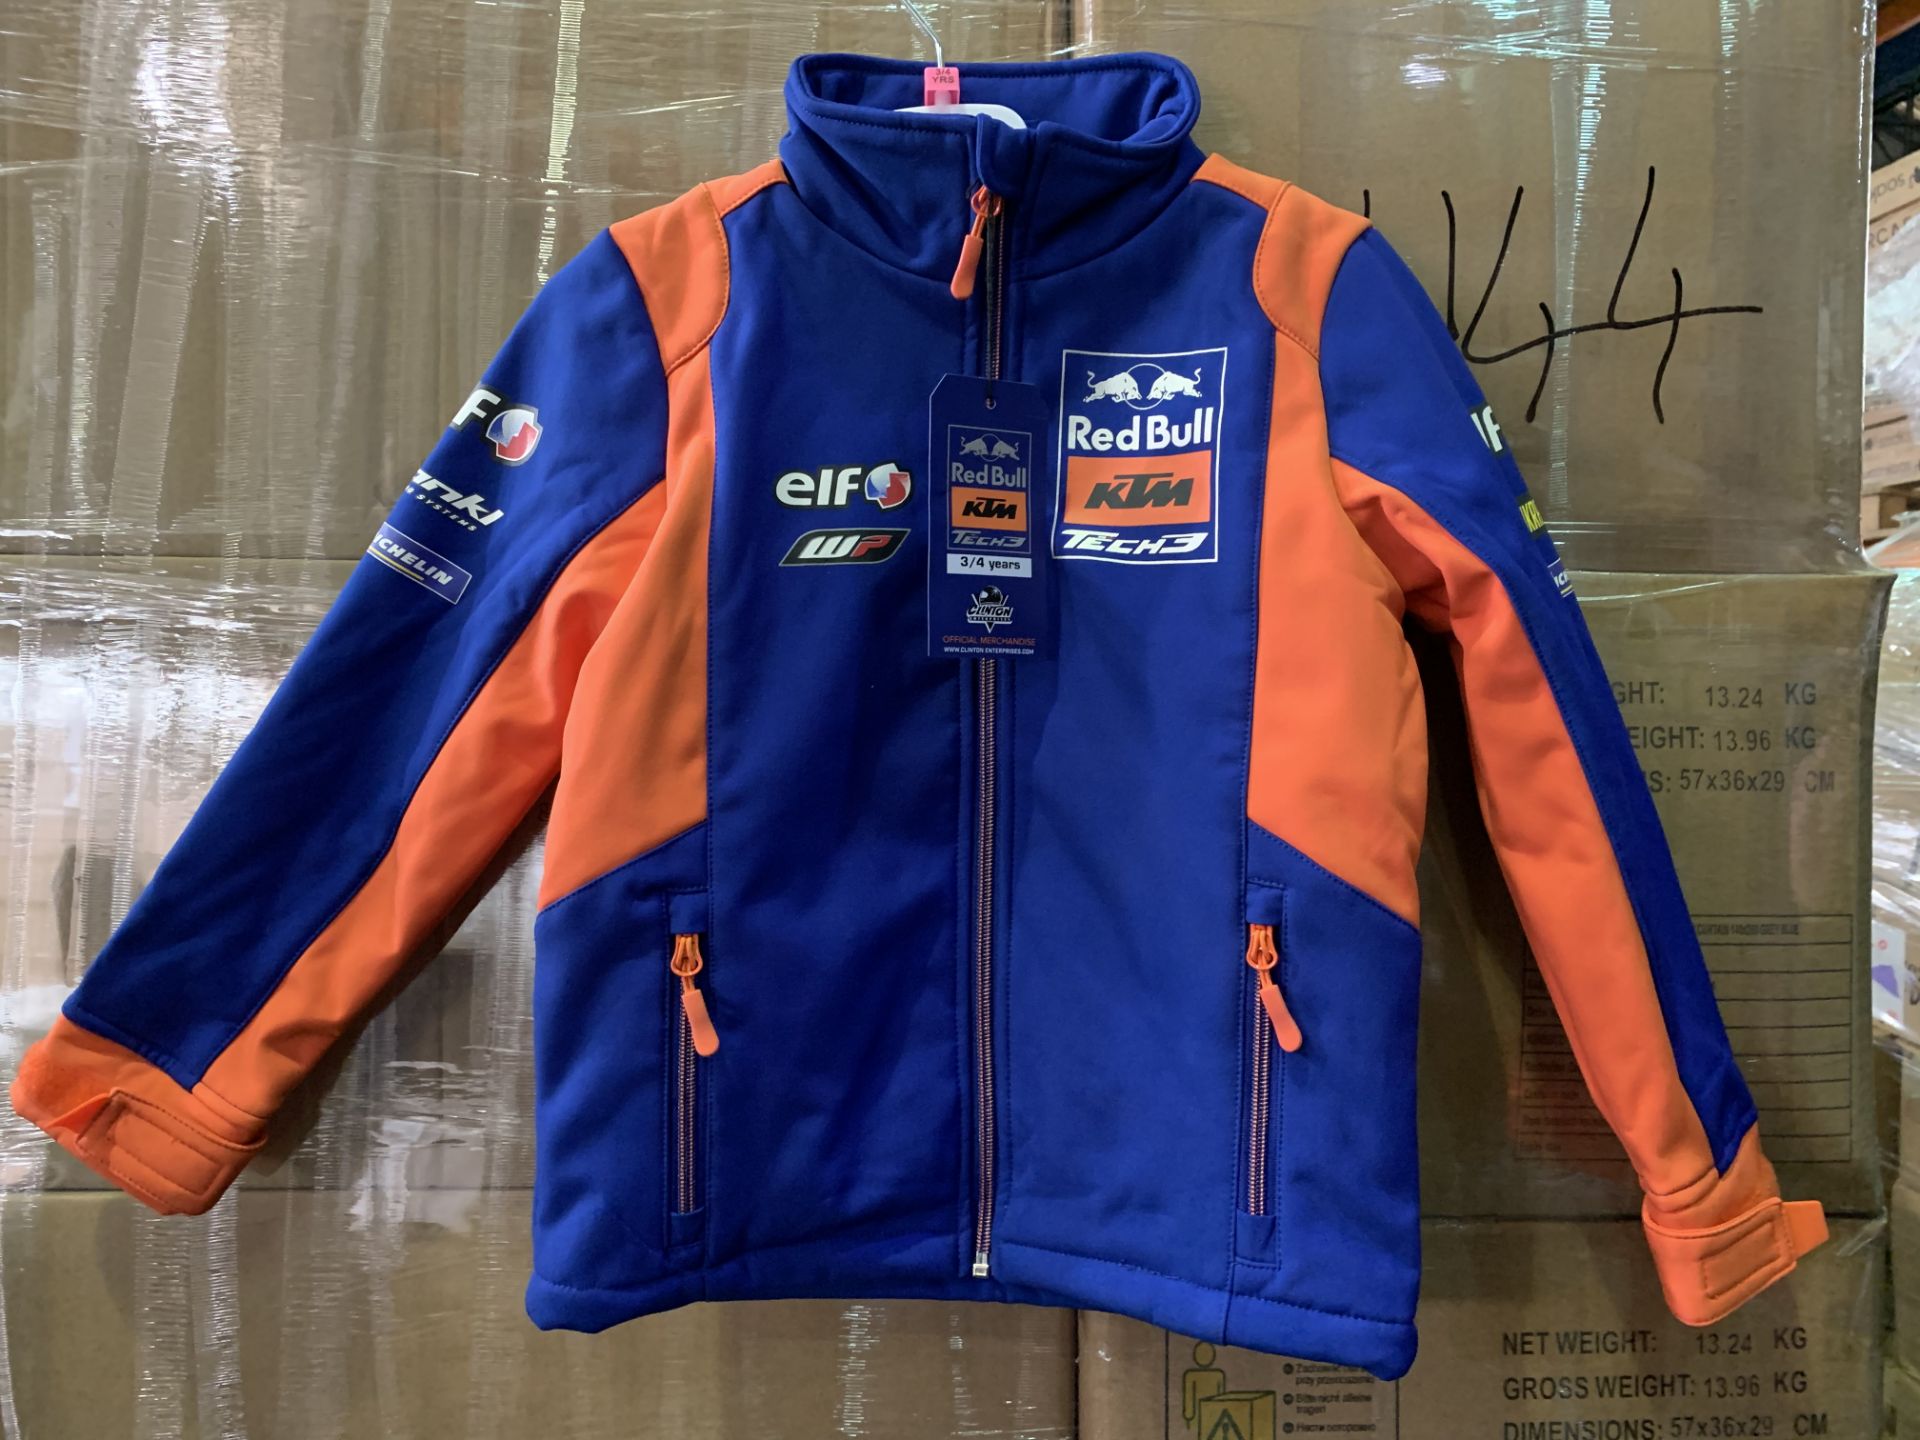 12 X BRAND NEW OFFICIAL RED BULL KTM OFFICIAL JACKETS SIZE 3-4 YEARS